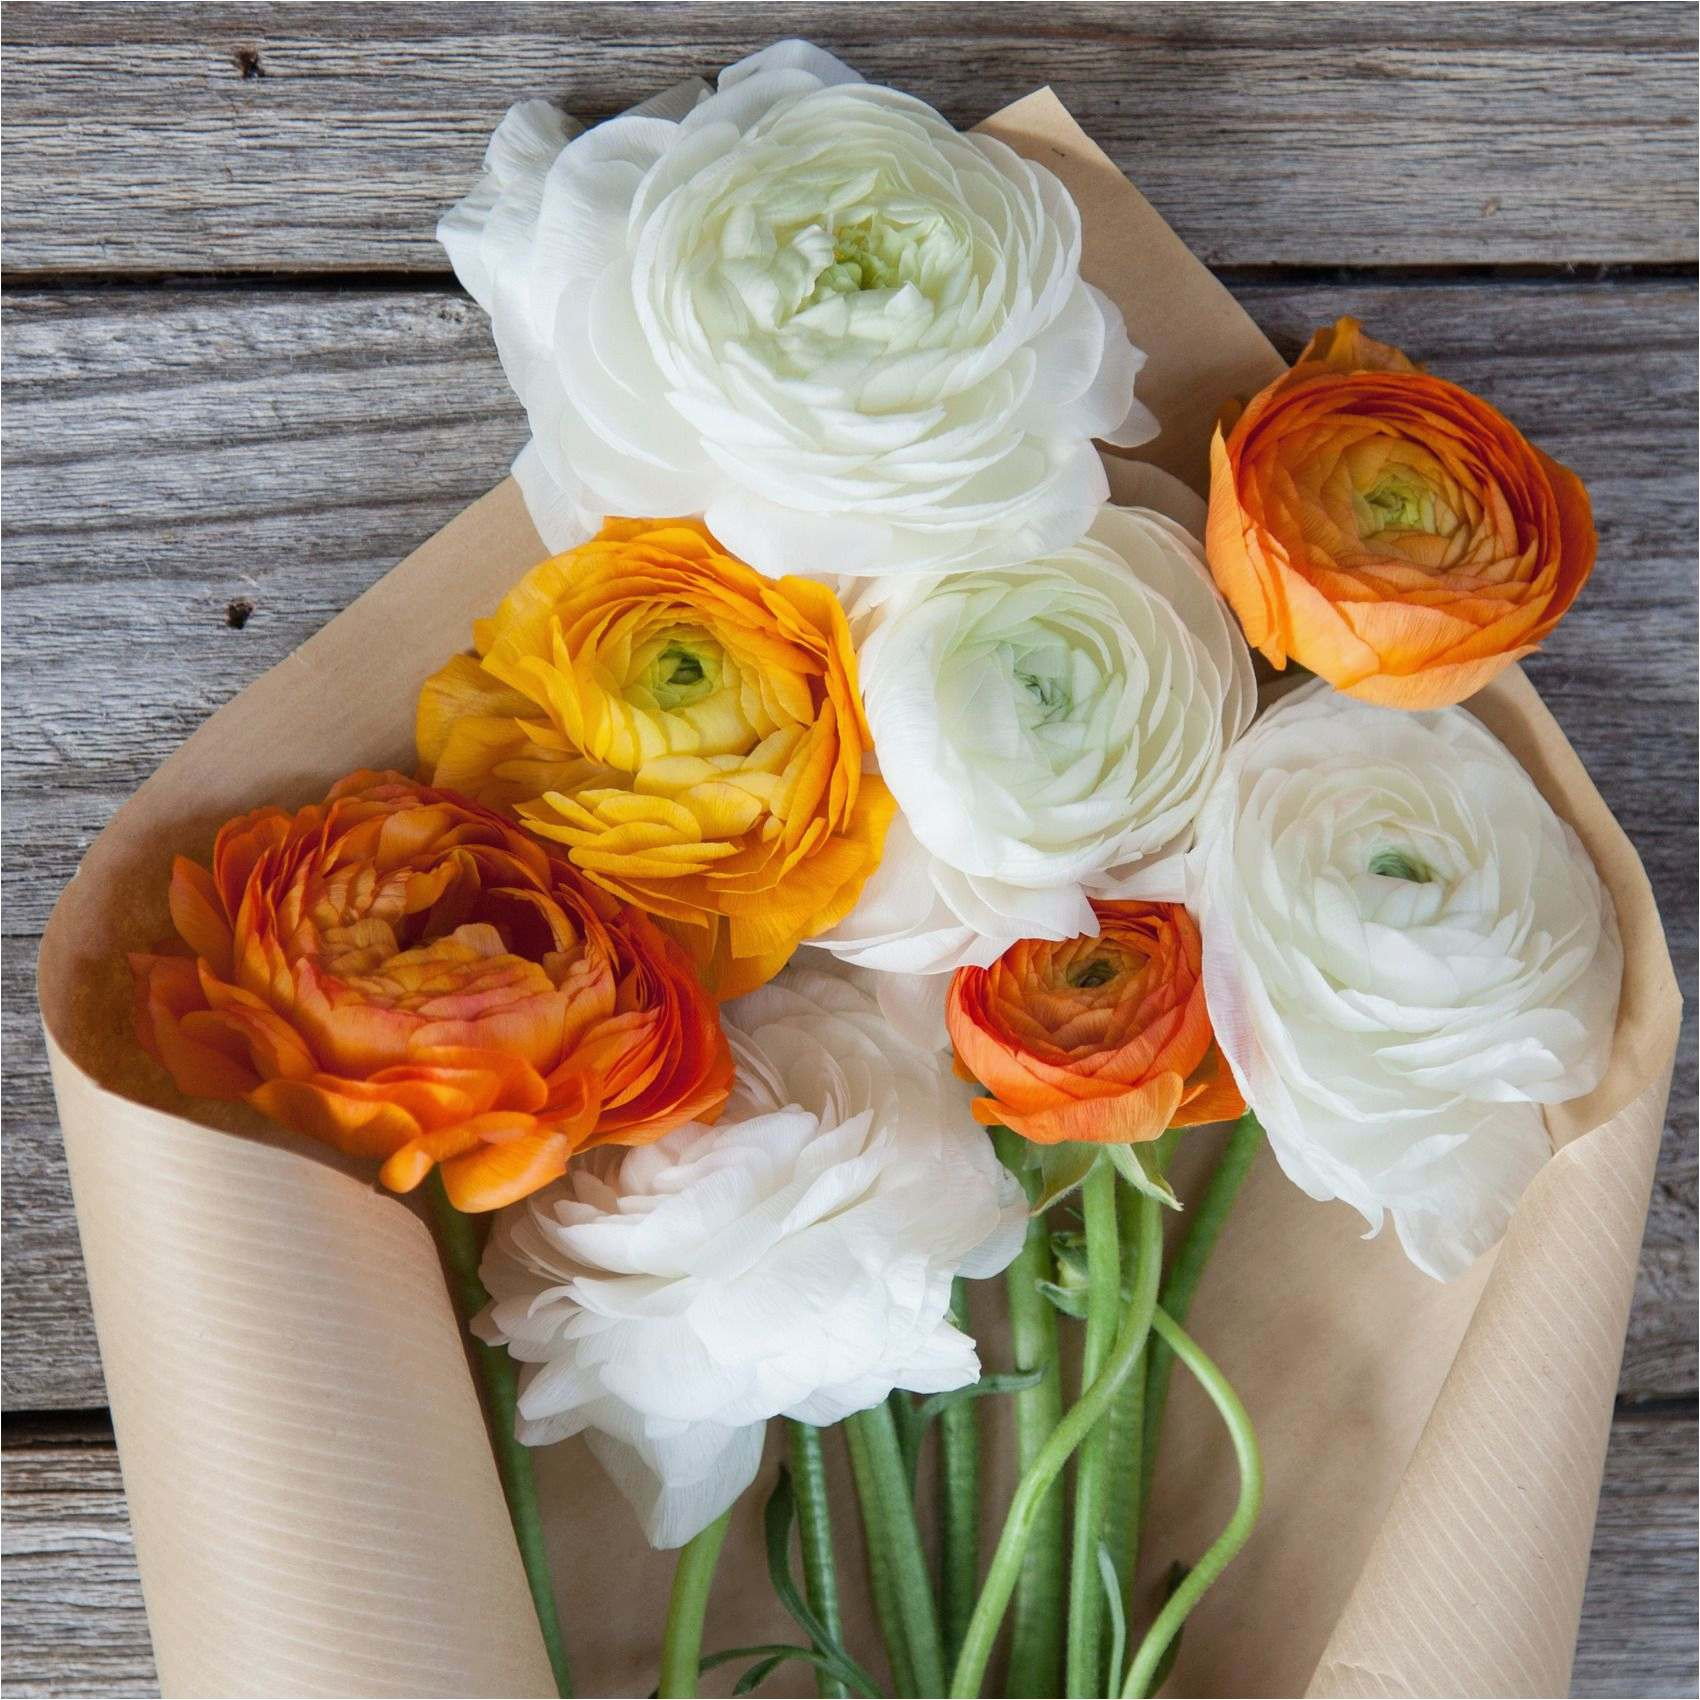 16 Perfect Proflowers Free Vase 2024 free download proflowers free vase of send fresh flowers picture 50 luxury flower bouquet pics style throughout send fresh flowers these white and orange ranunculus are a total crowd pleaser as luxury